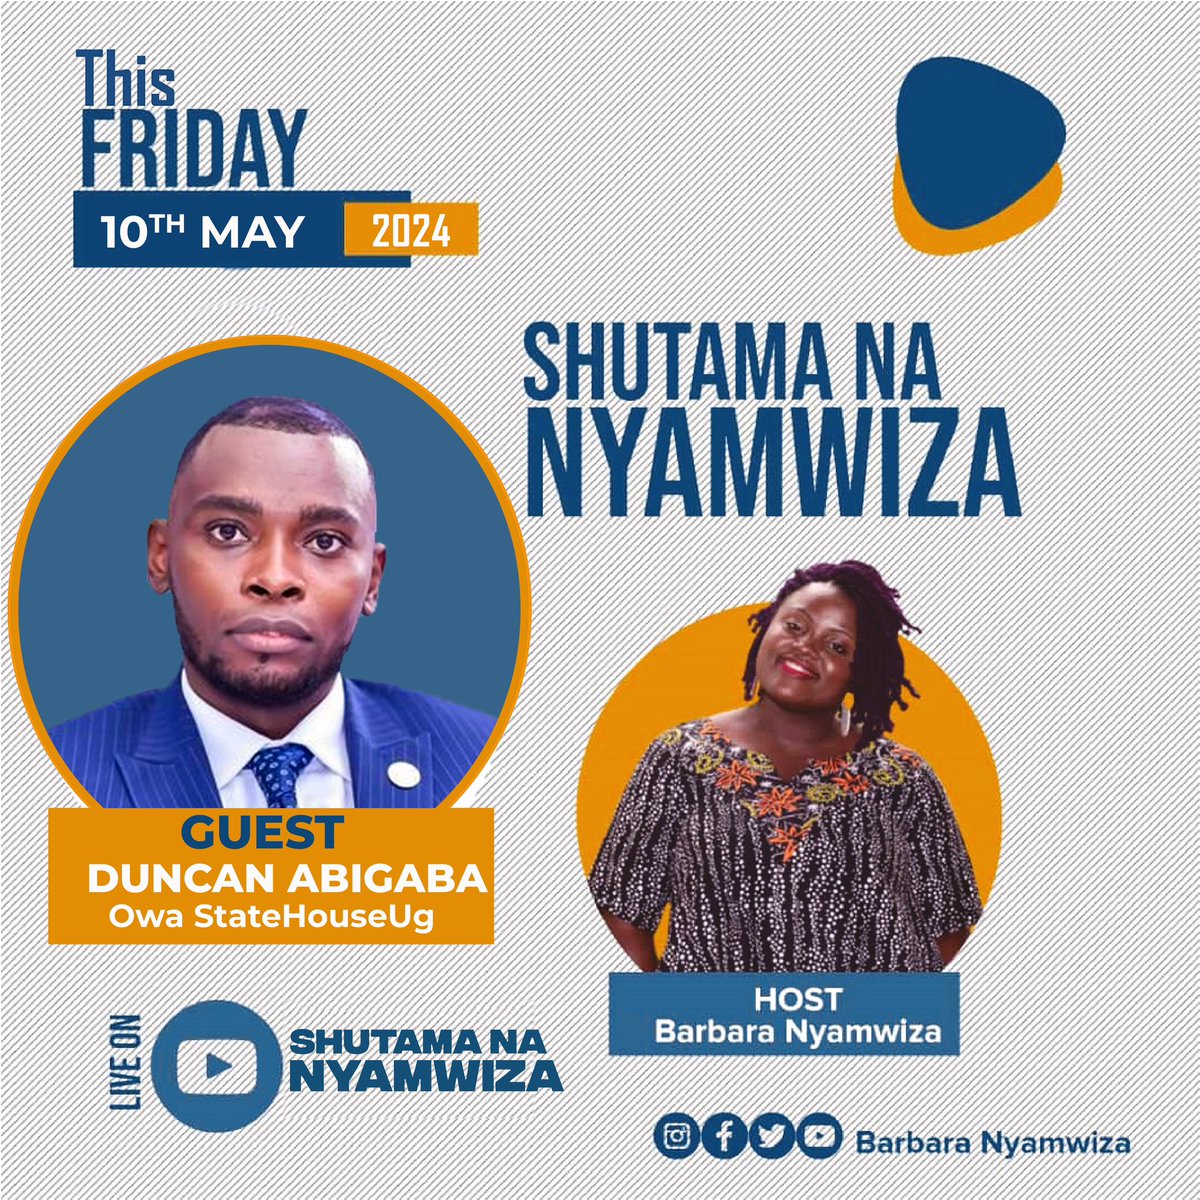 Good people, good morning. Official poster is here. We’ll have @DuncanAbigaba this Friday for our weekly dose of #ShutamaNaNyamwiza Remember to join us.